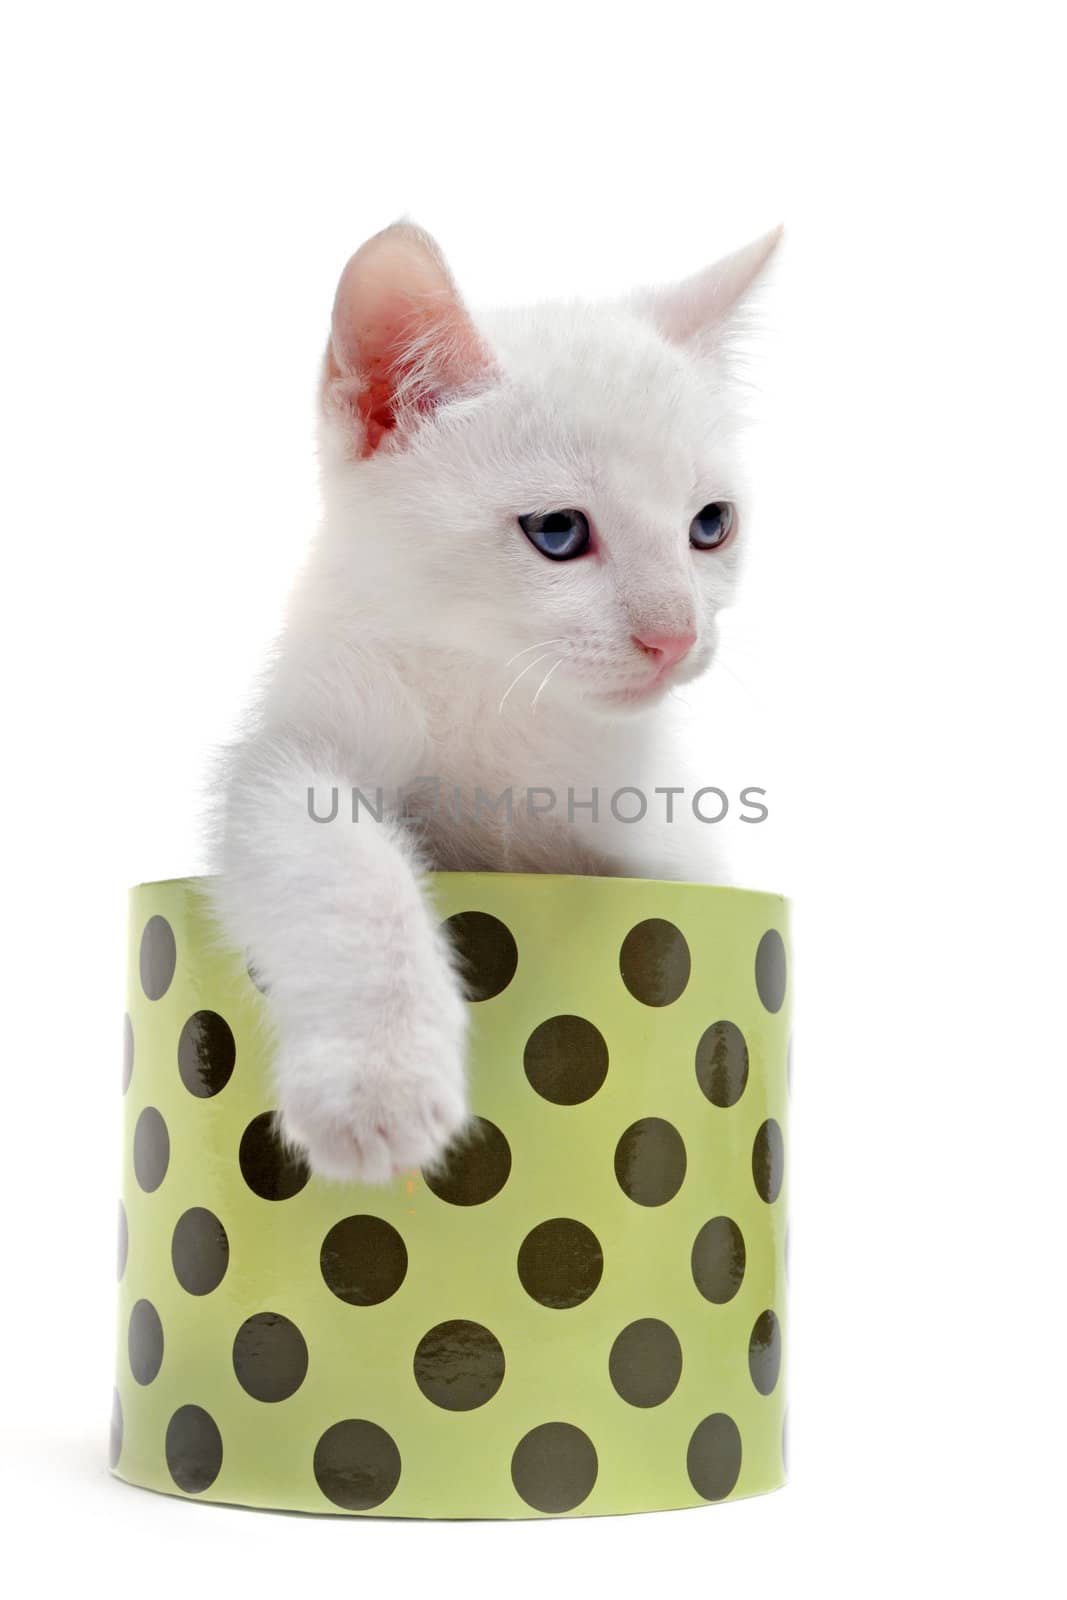 young white kitten in a box  in front of white background